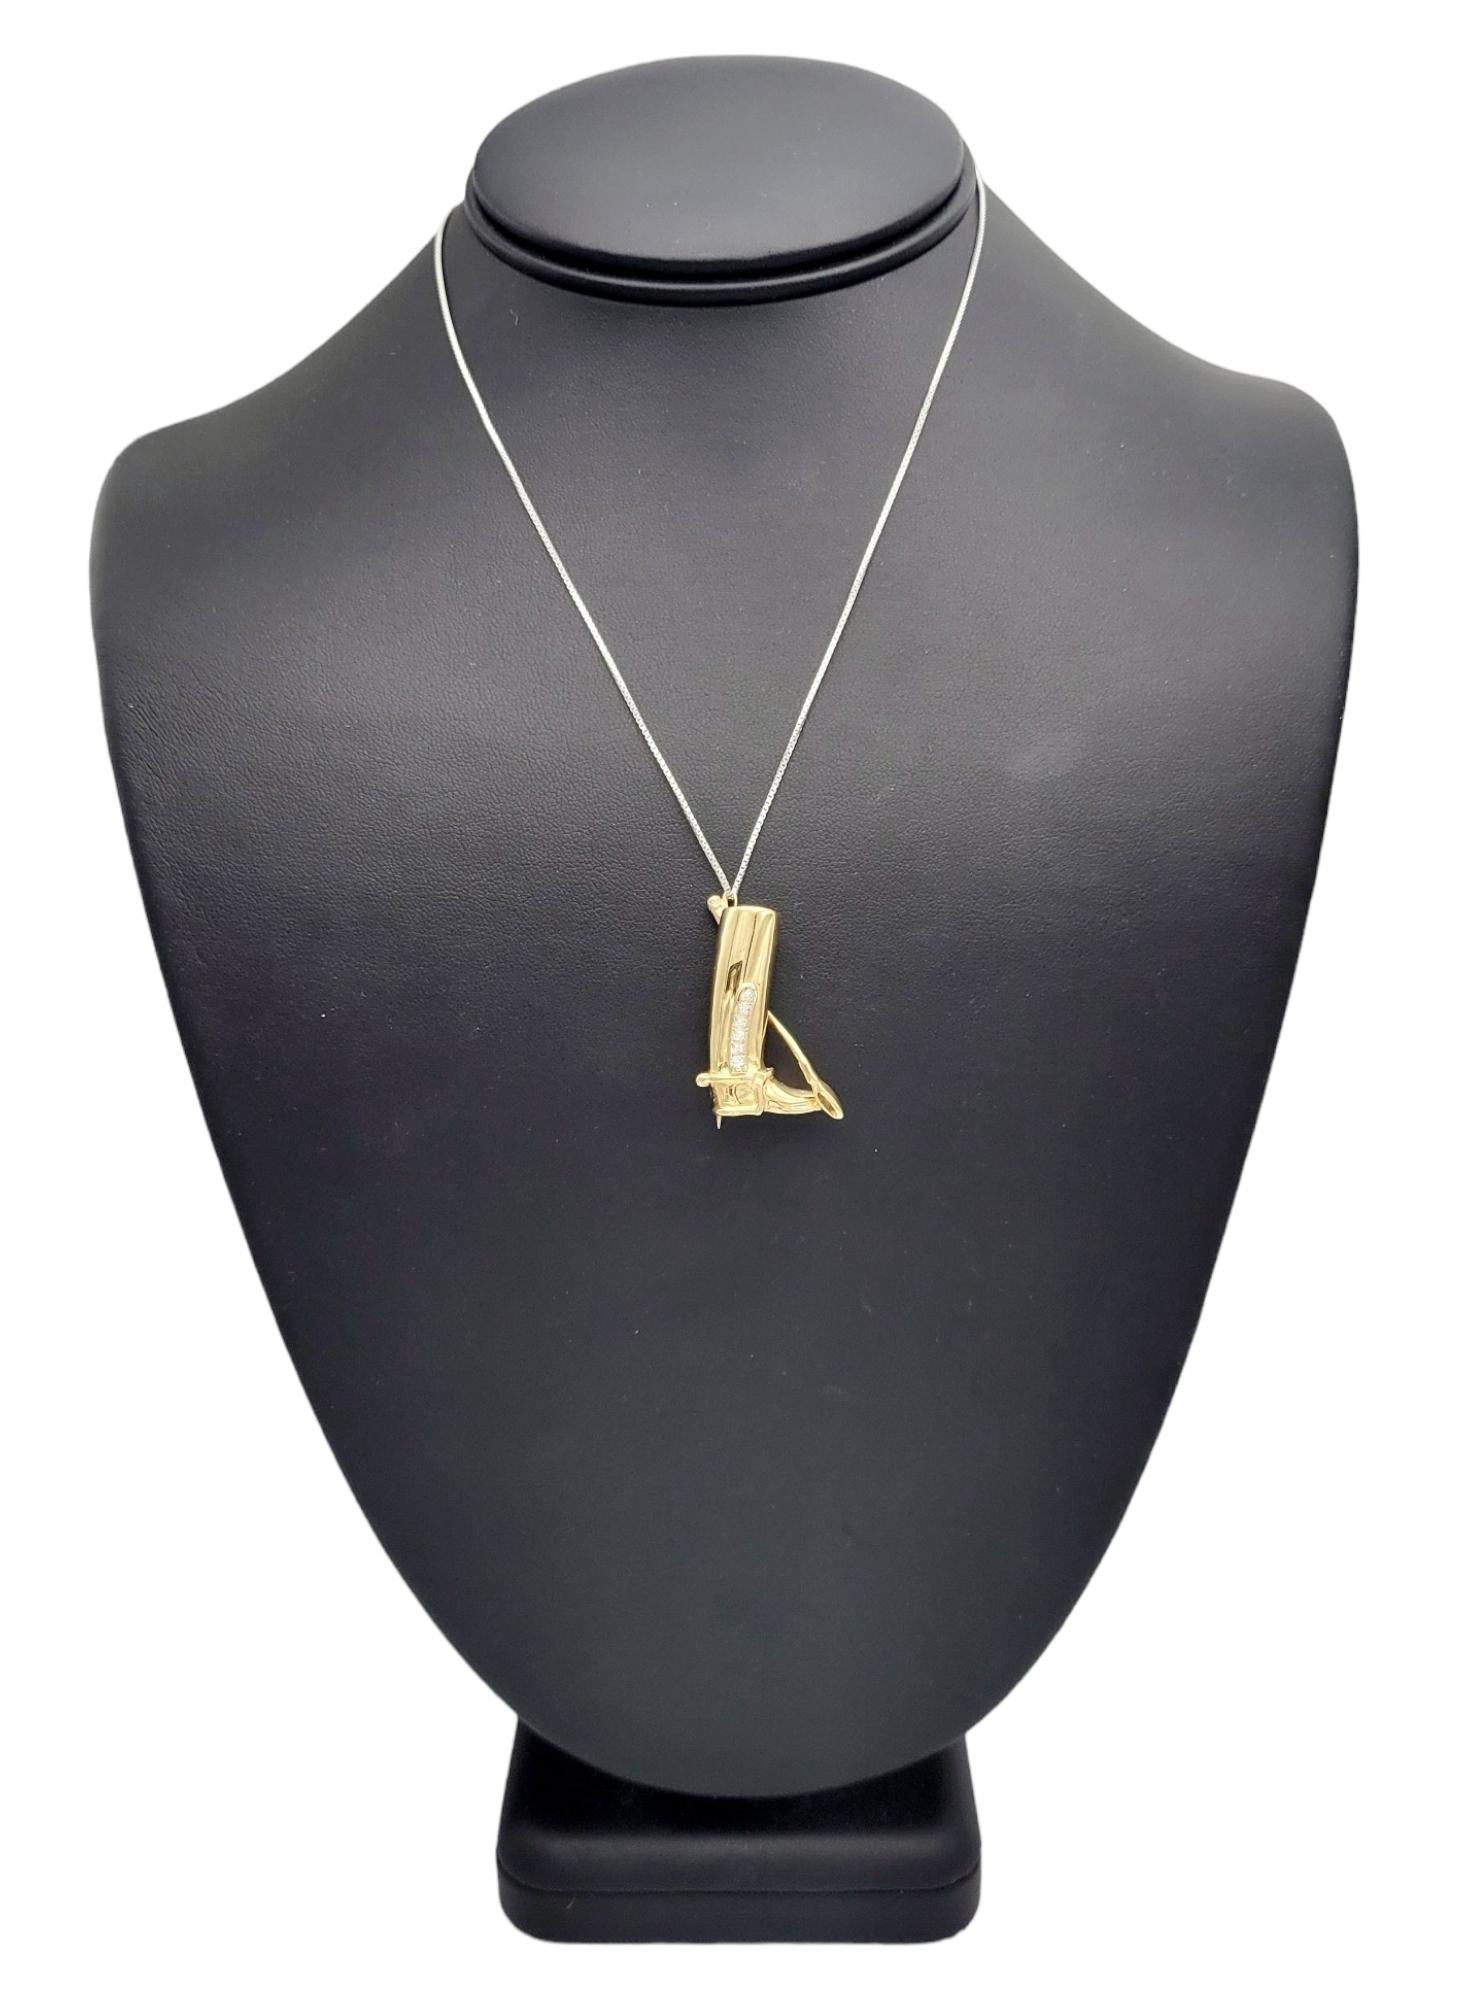 Diamond Equestrian Boot & Riding Crop Brooch / Pendant in 14 Karat Yellow Gold For Sale 4